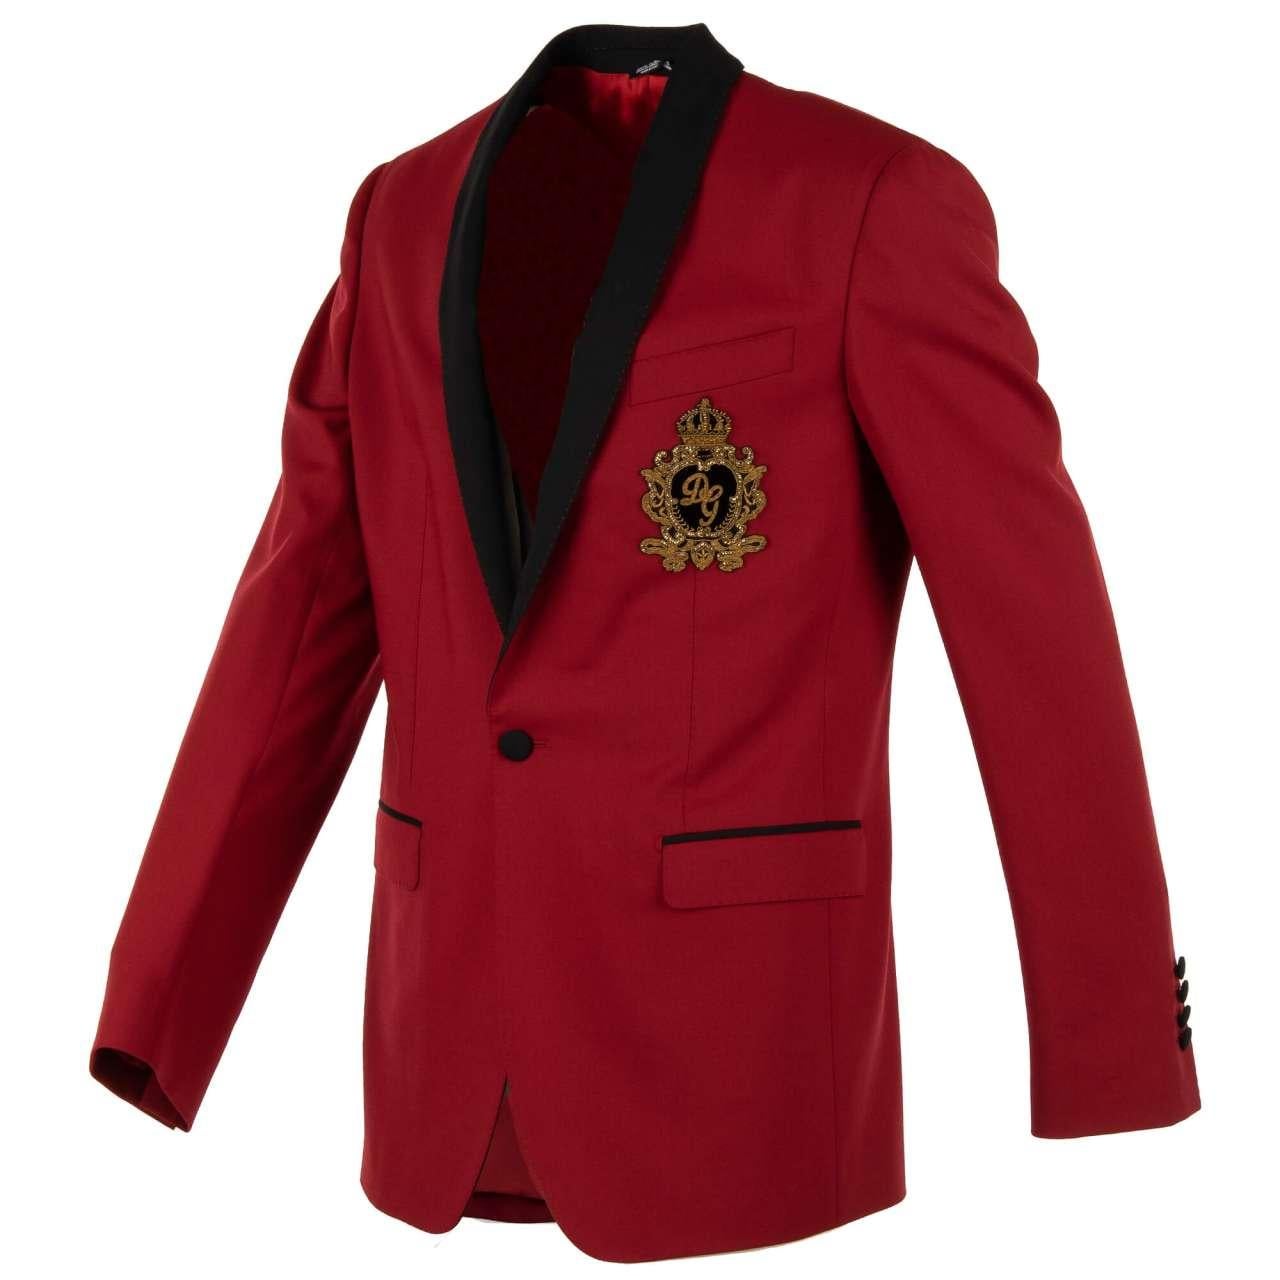 - Virgin Wool Blend blazer NAPOLI with crown and logo pearls and goldwork embroidery in black and red by DOLCE & GABBANA - Former RRP: EUR 2.750 - MADE IN ITALY - New with Tag - Slim Fit - Model: G2LY2Z-GEC65-R0046 - Material: 54% Polyester, 44%